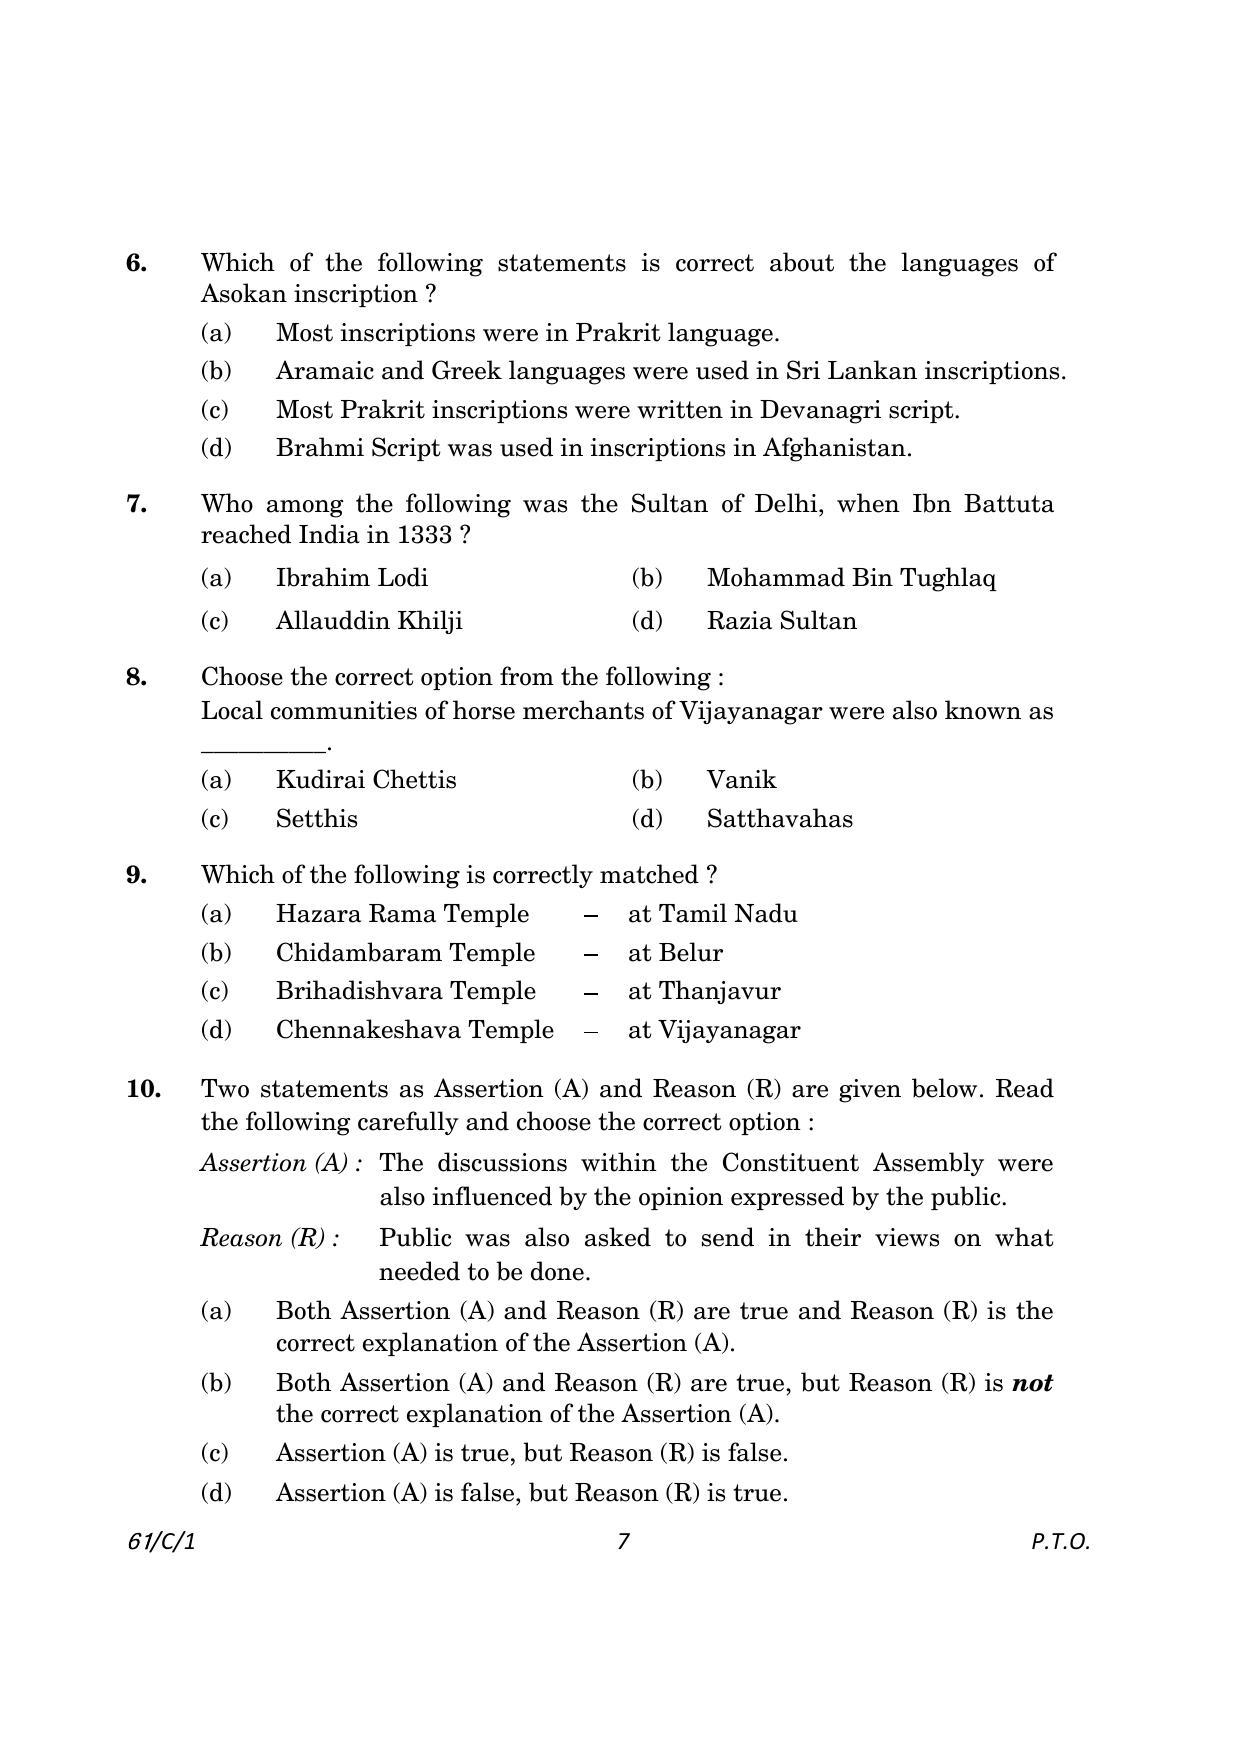 CBSE Class 12 61-1 History 2023 (Compartment) Question Paper - Page 7